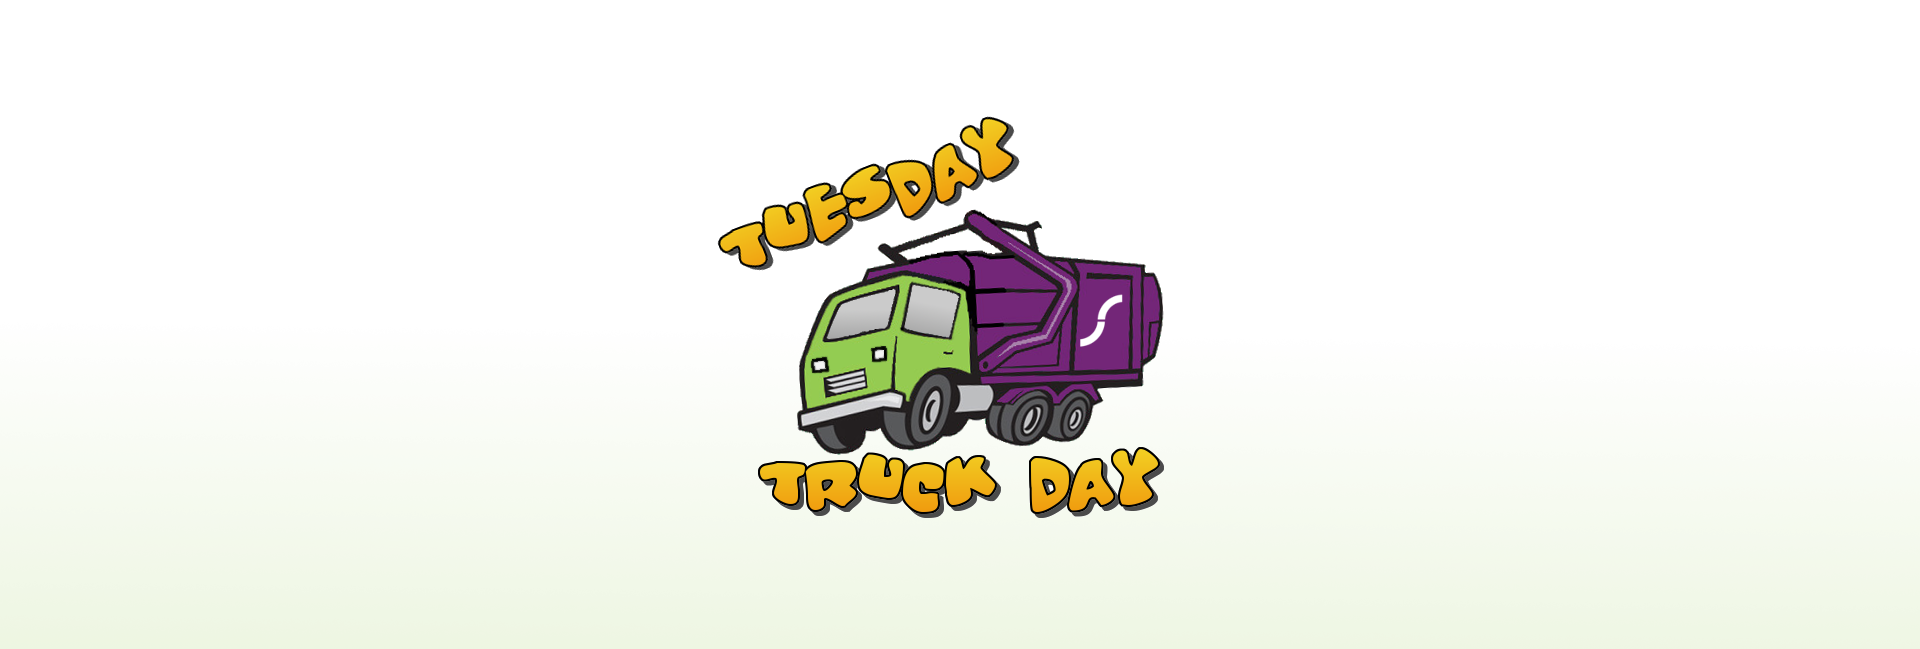 Tuesday Truck Day header image